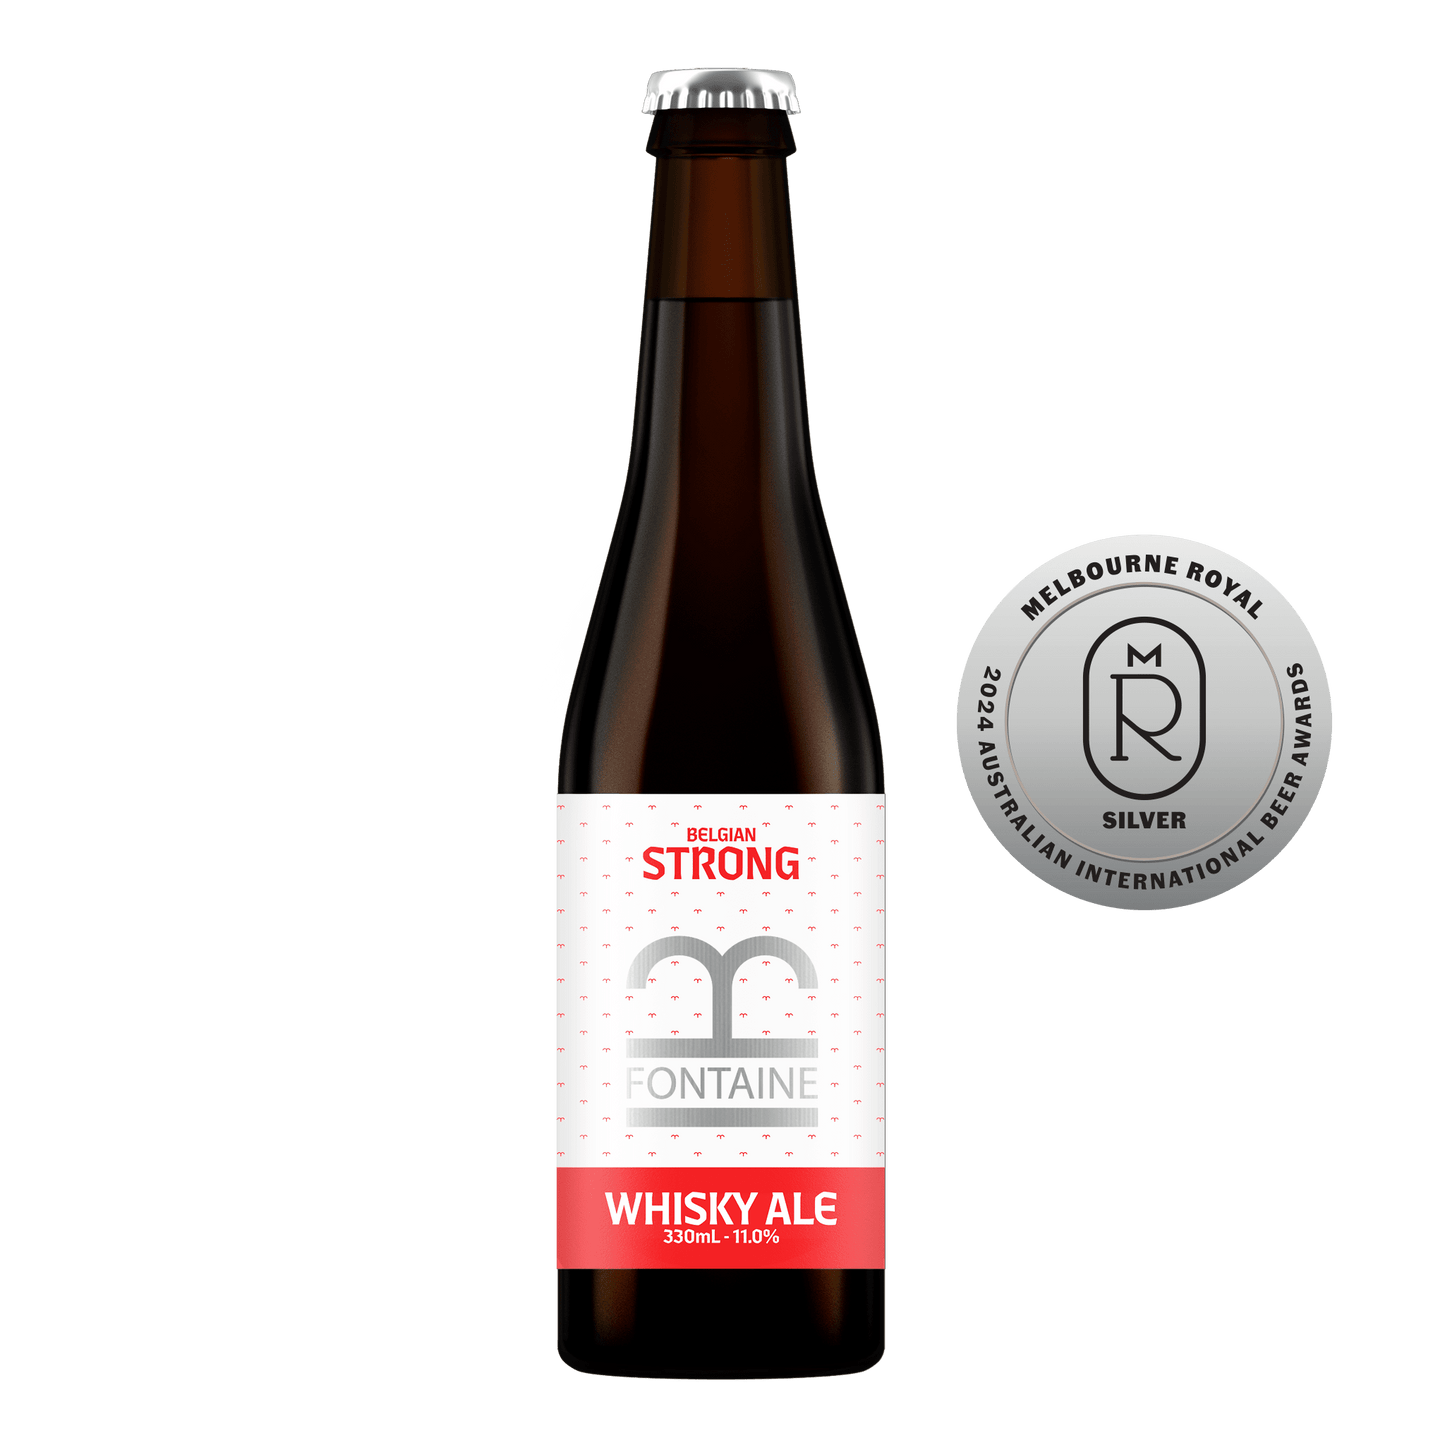 Not So Usual - Belgian Strong Whisky Ale - 330mL